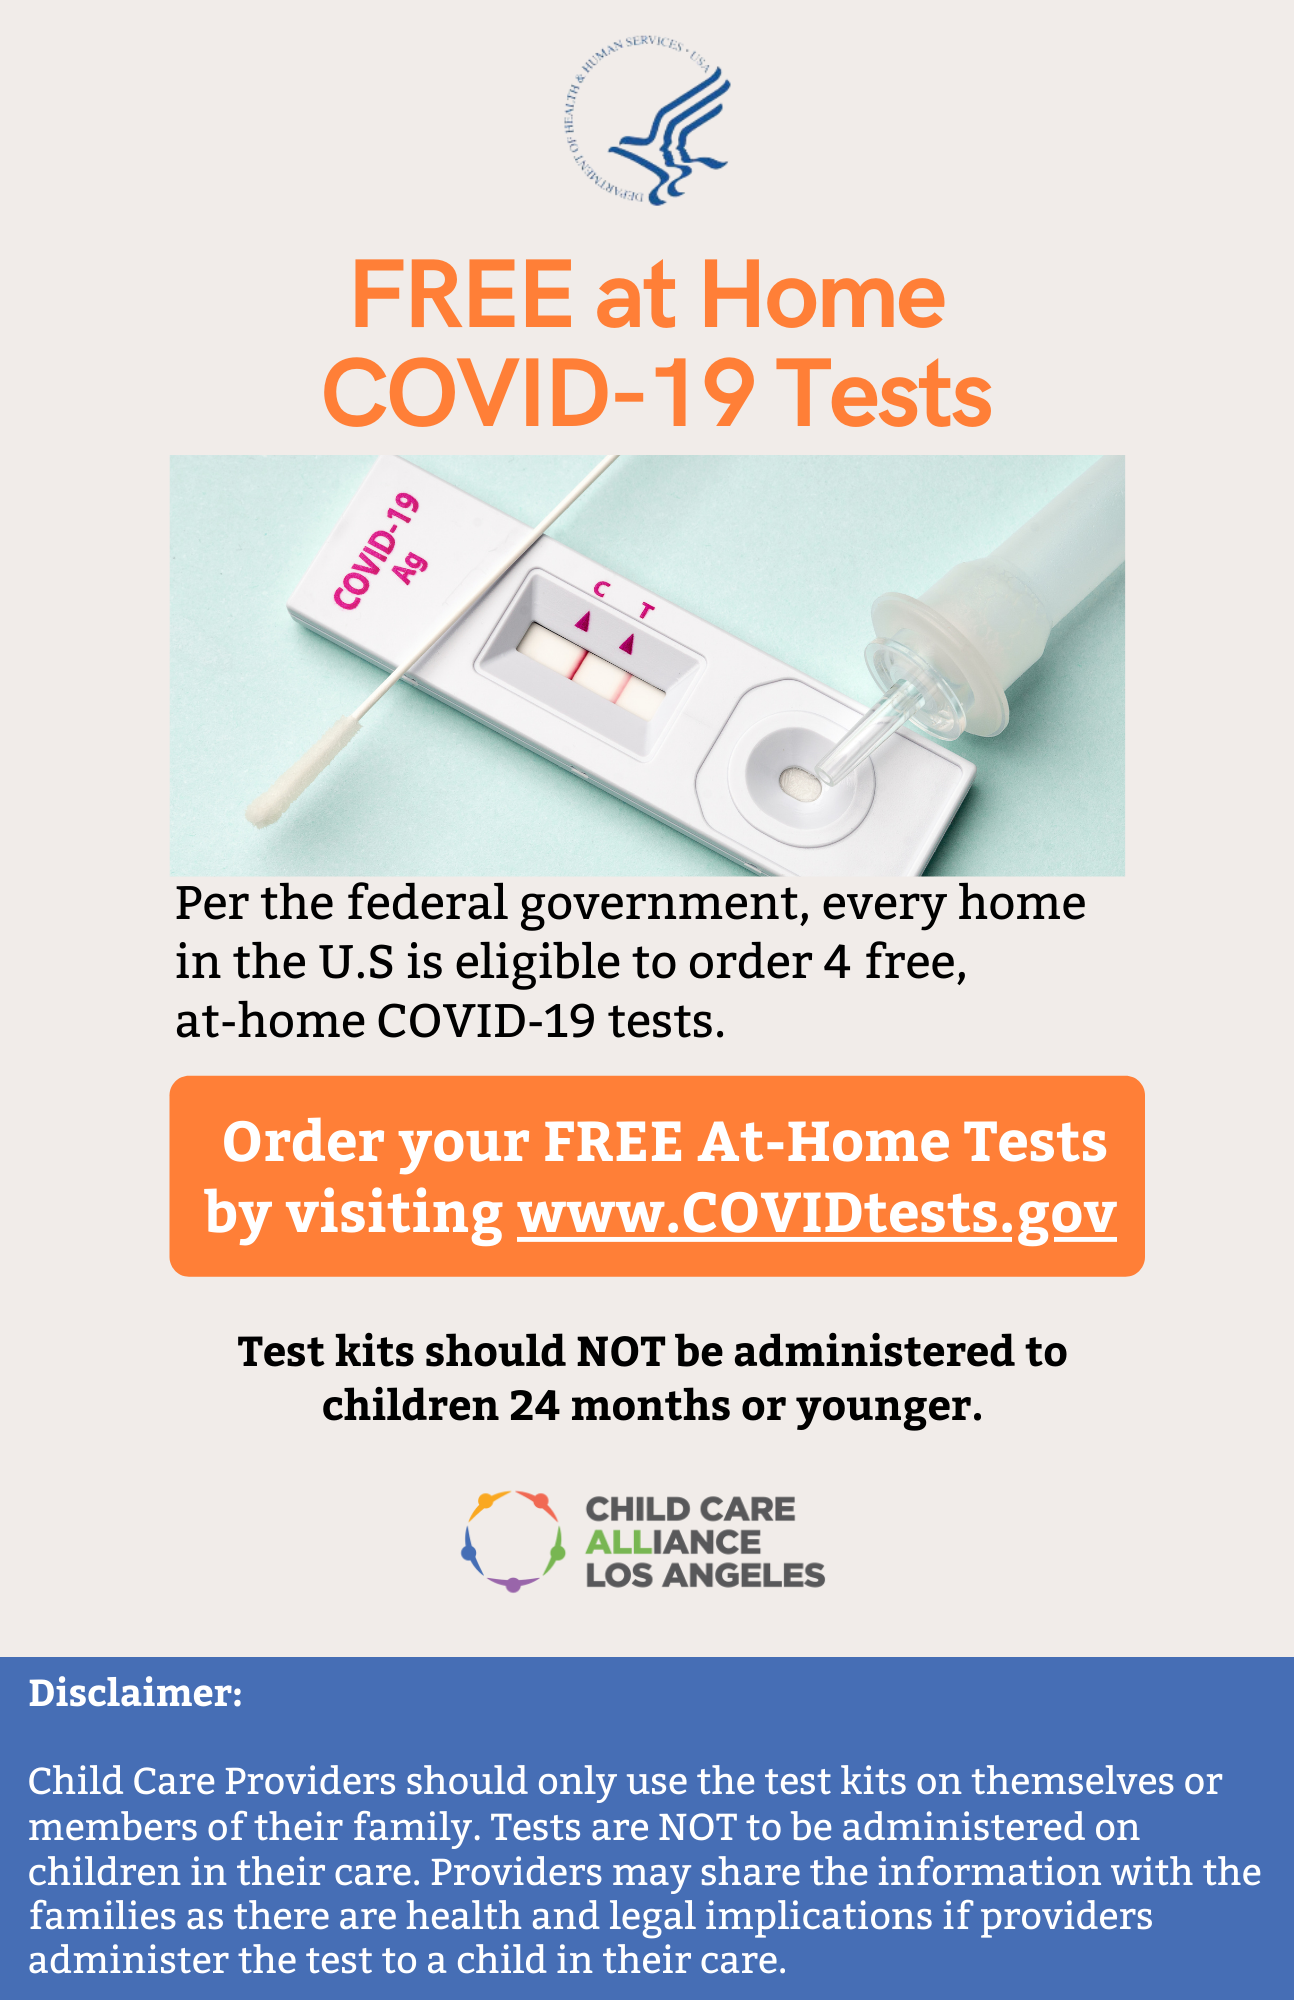 FREE at Home COVID-19 Test